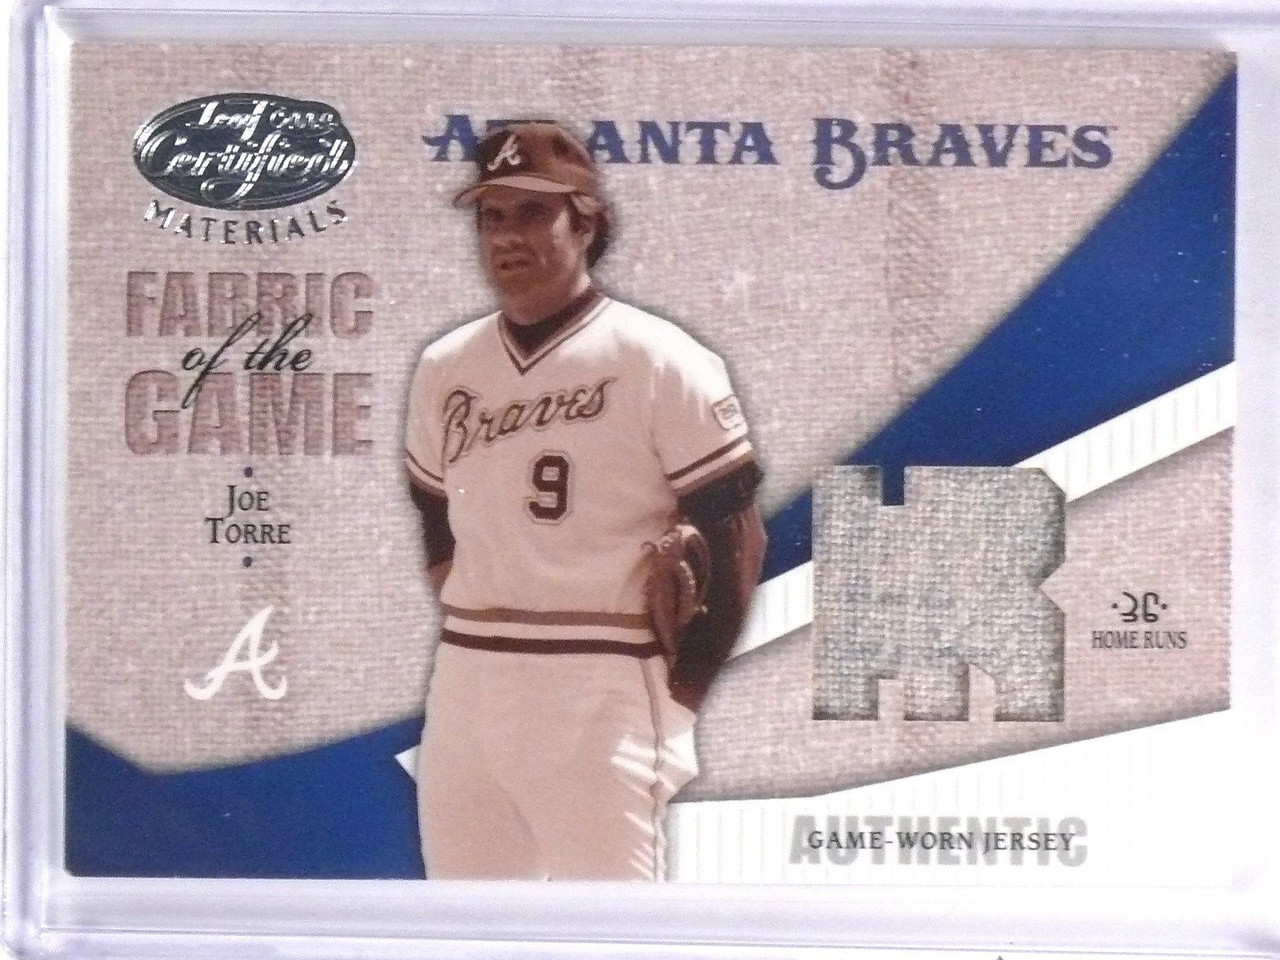 2004 Leaf Certified Fabric of the Game Joe Torre Jersey #D12/36 #FG149 -  Sportsnut Cards